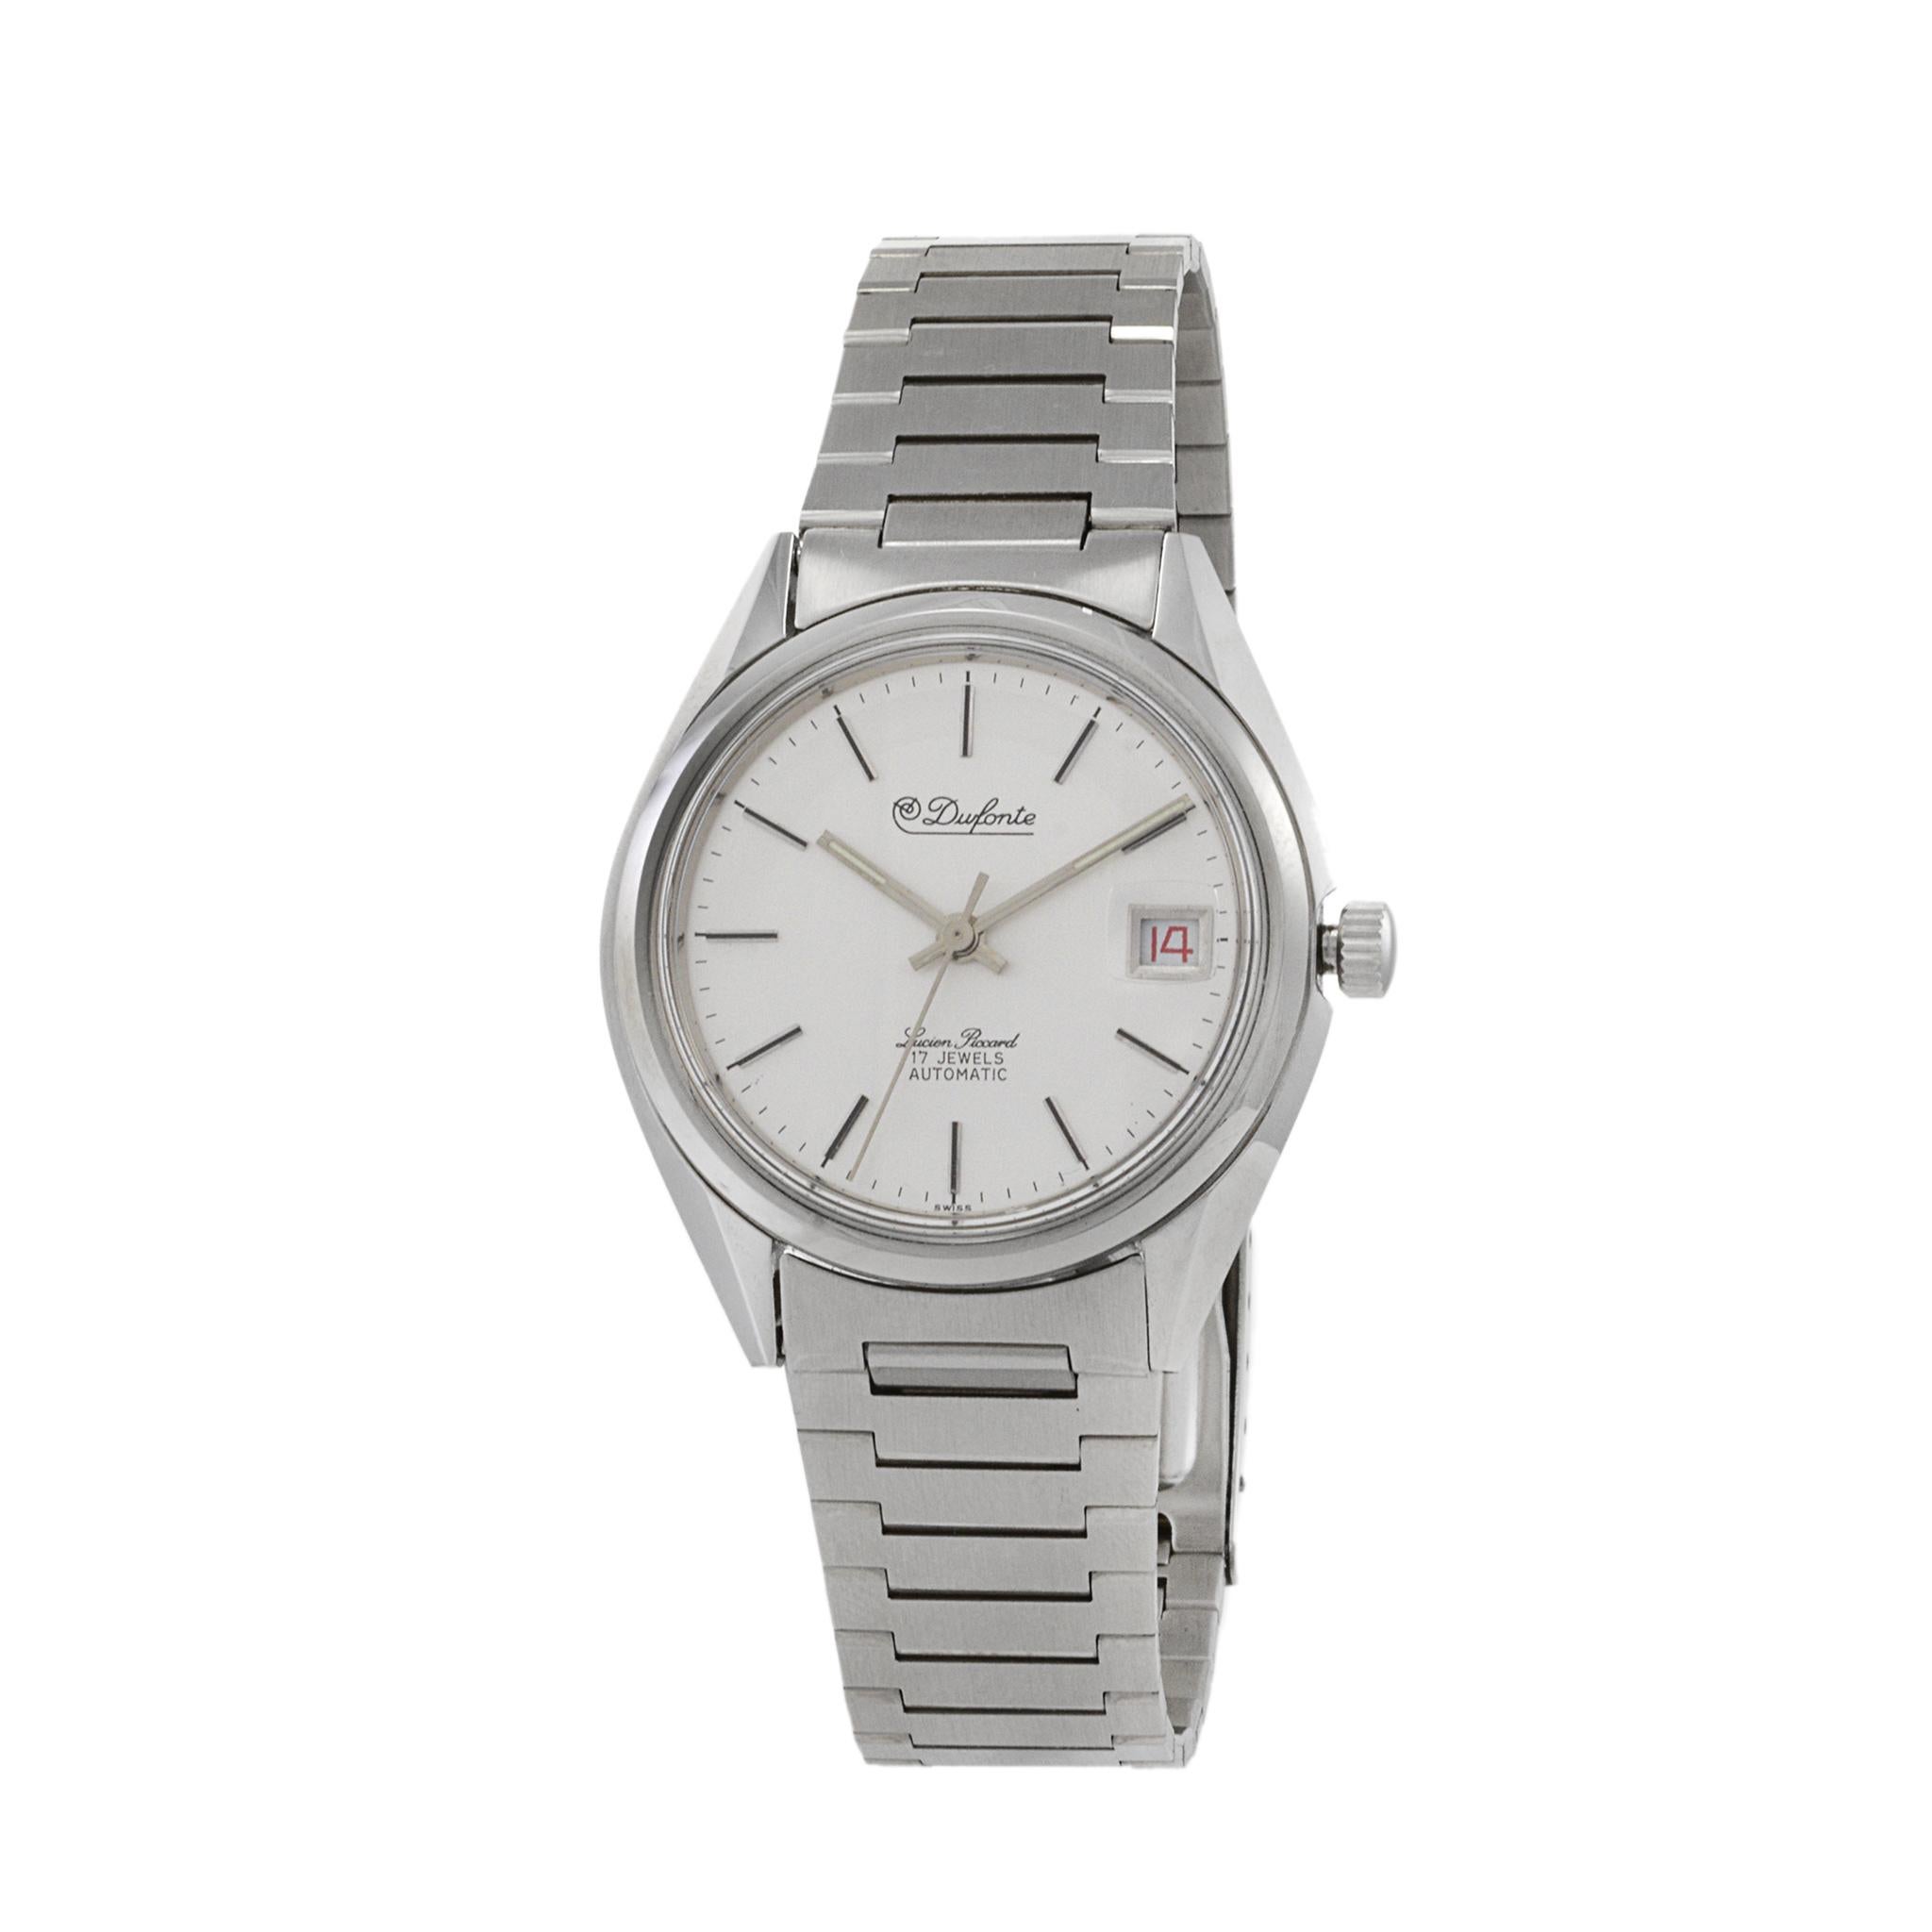 This is a Dufonte by Lucien Piccard calatrava watch with date function. This watch is powered by a Swiss ETA caliber 2786 automatic movement. The date function is quickset.

The pristine silver dial features baton markers and stick hands. The date